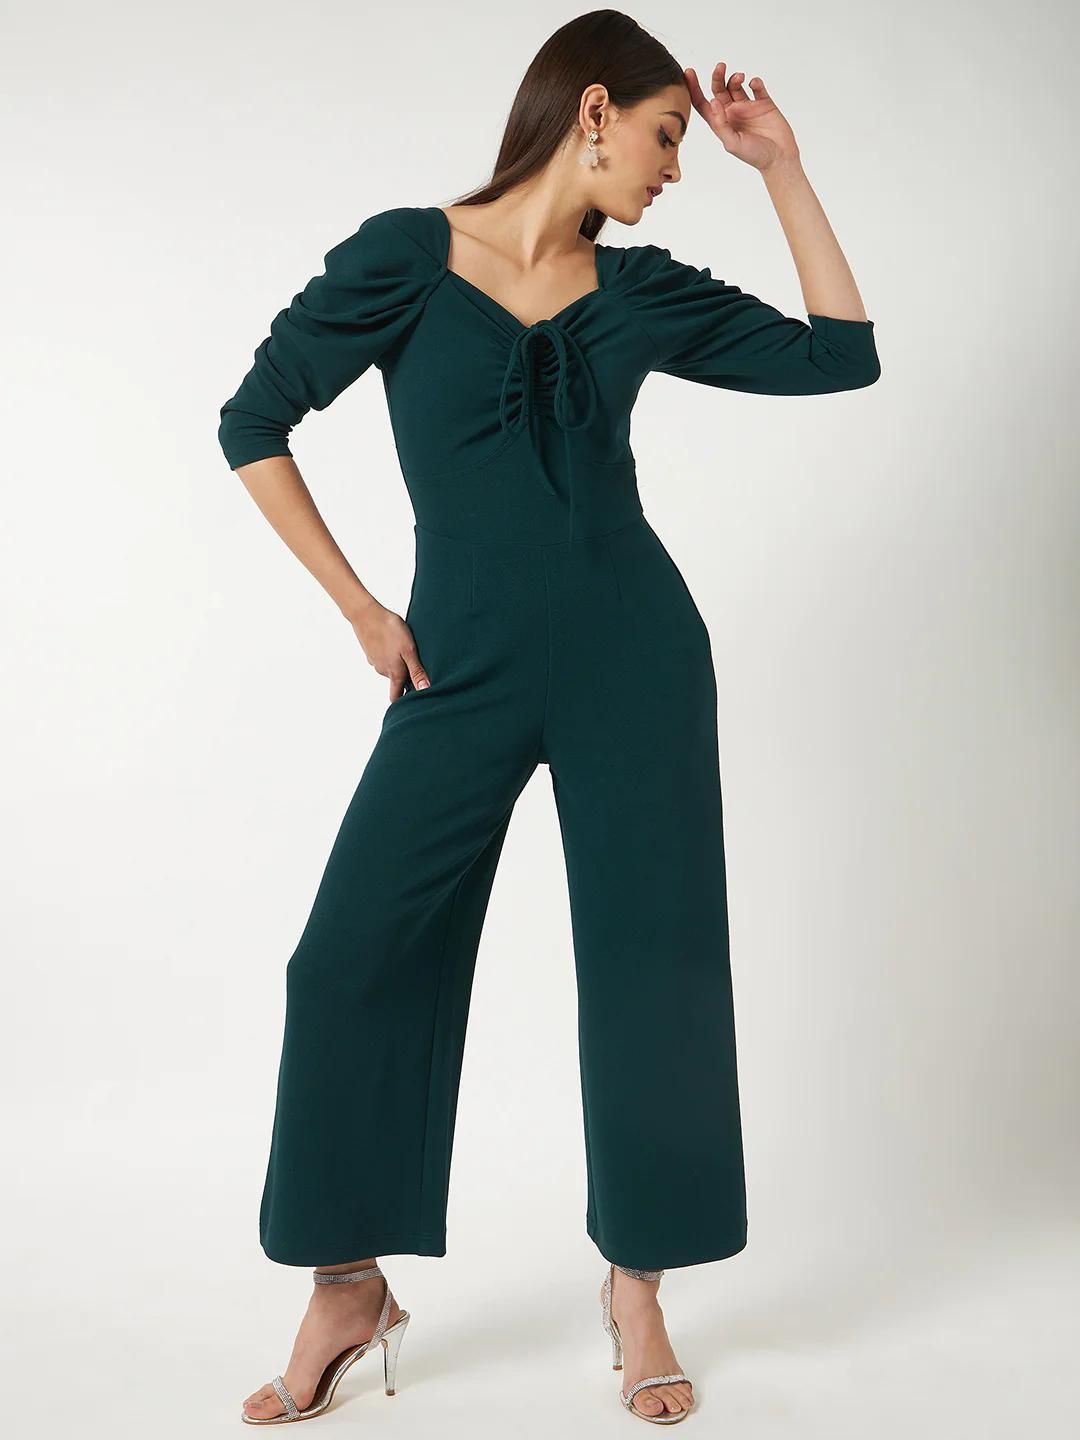 PANNKH Green Solid Stylish Jumpsuit With Cowl Sleeves